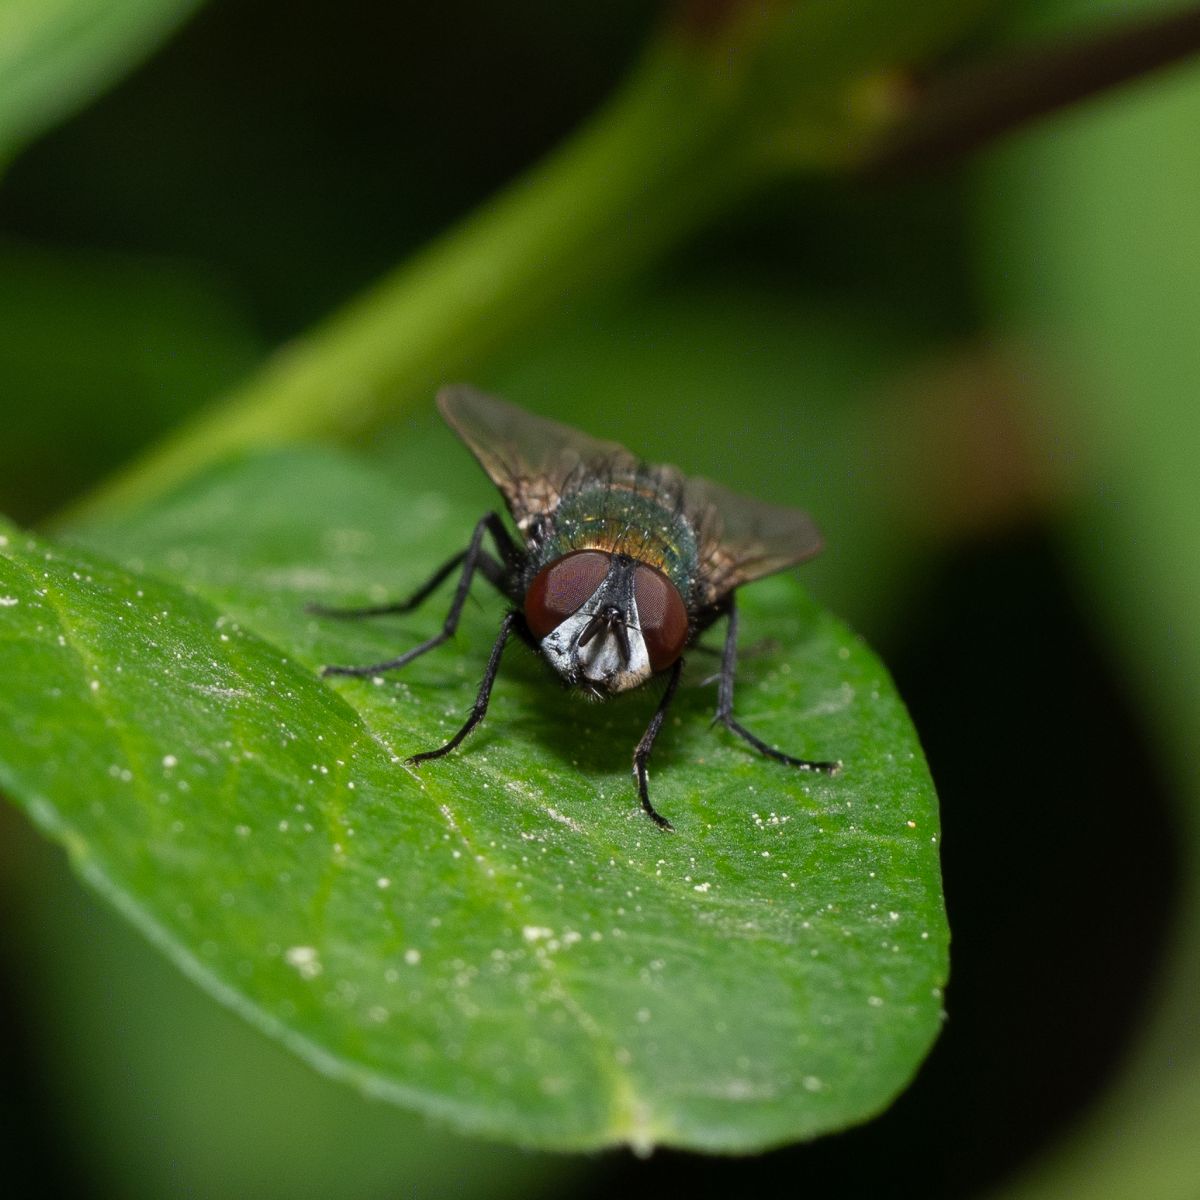 A stinky, gross little fly looks at the camera. 